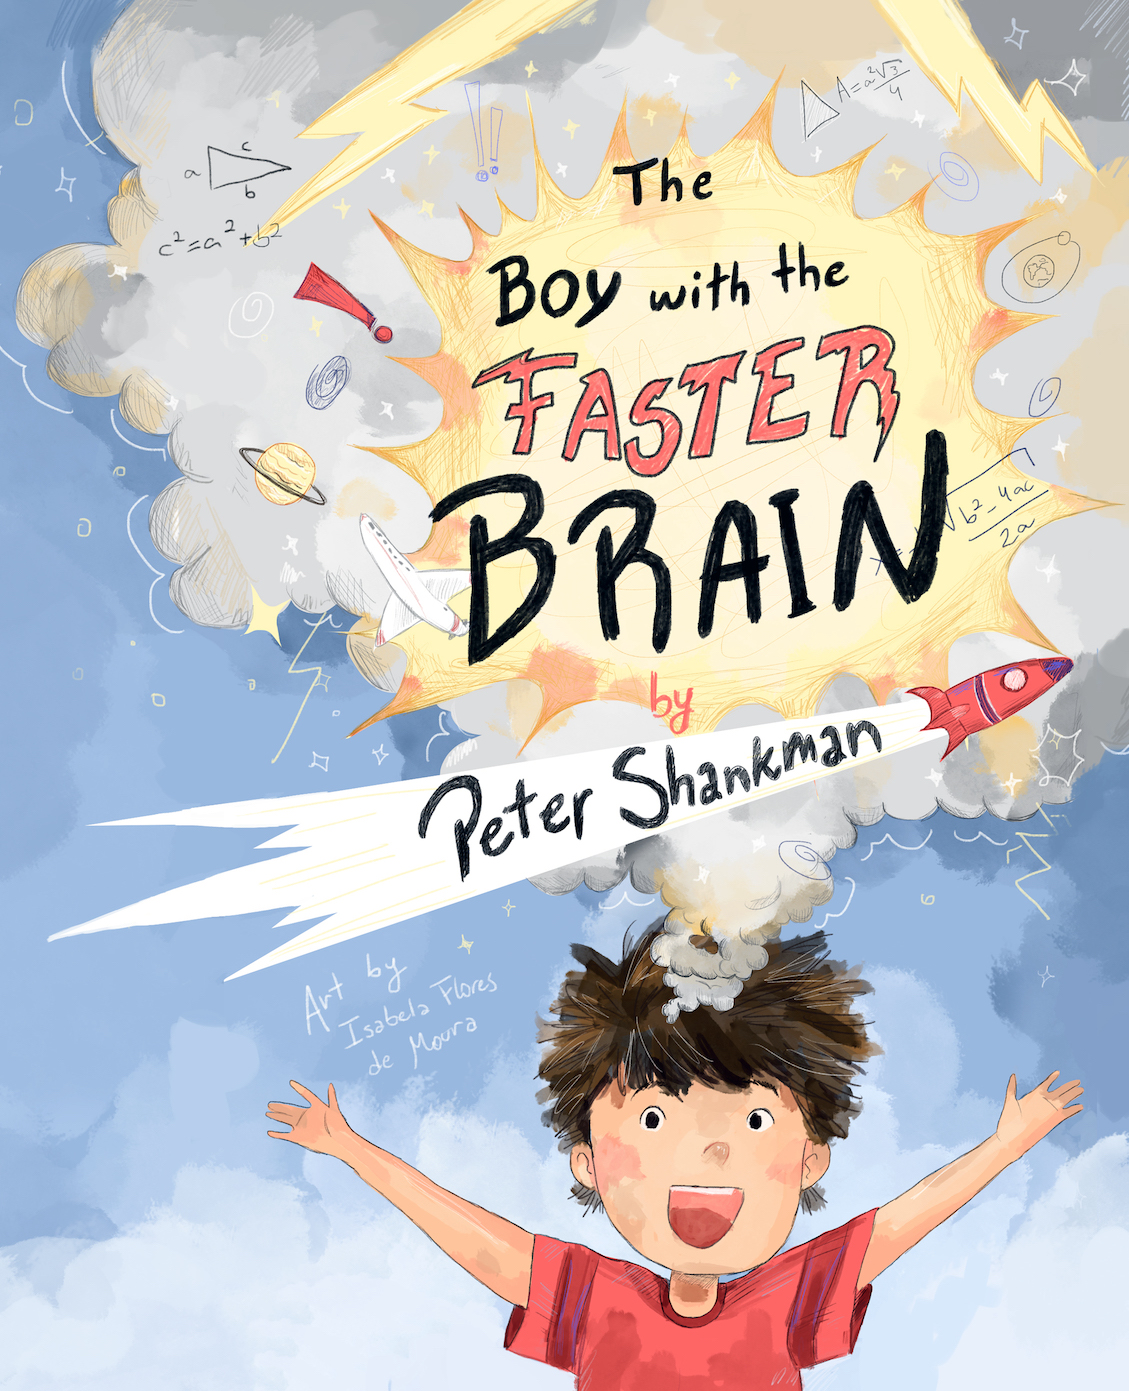 The Boy With the Faster Brain